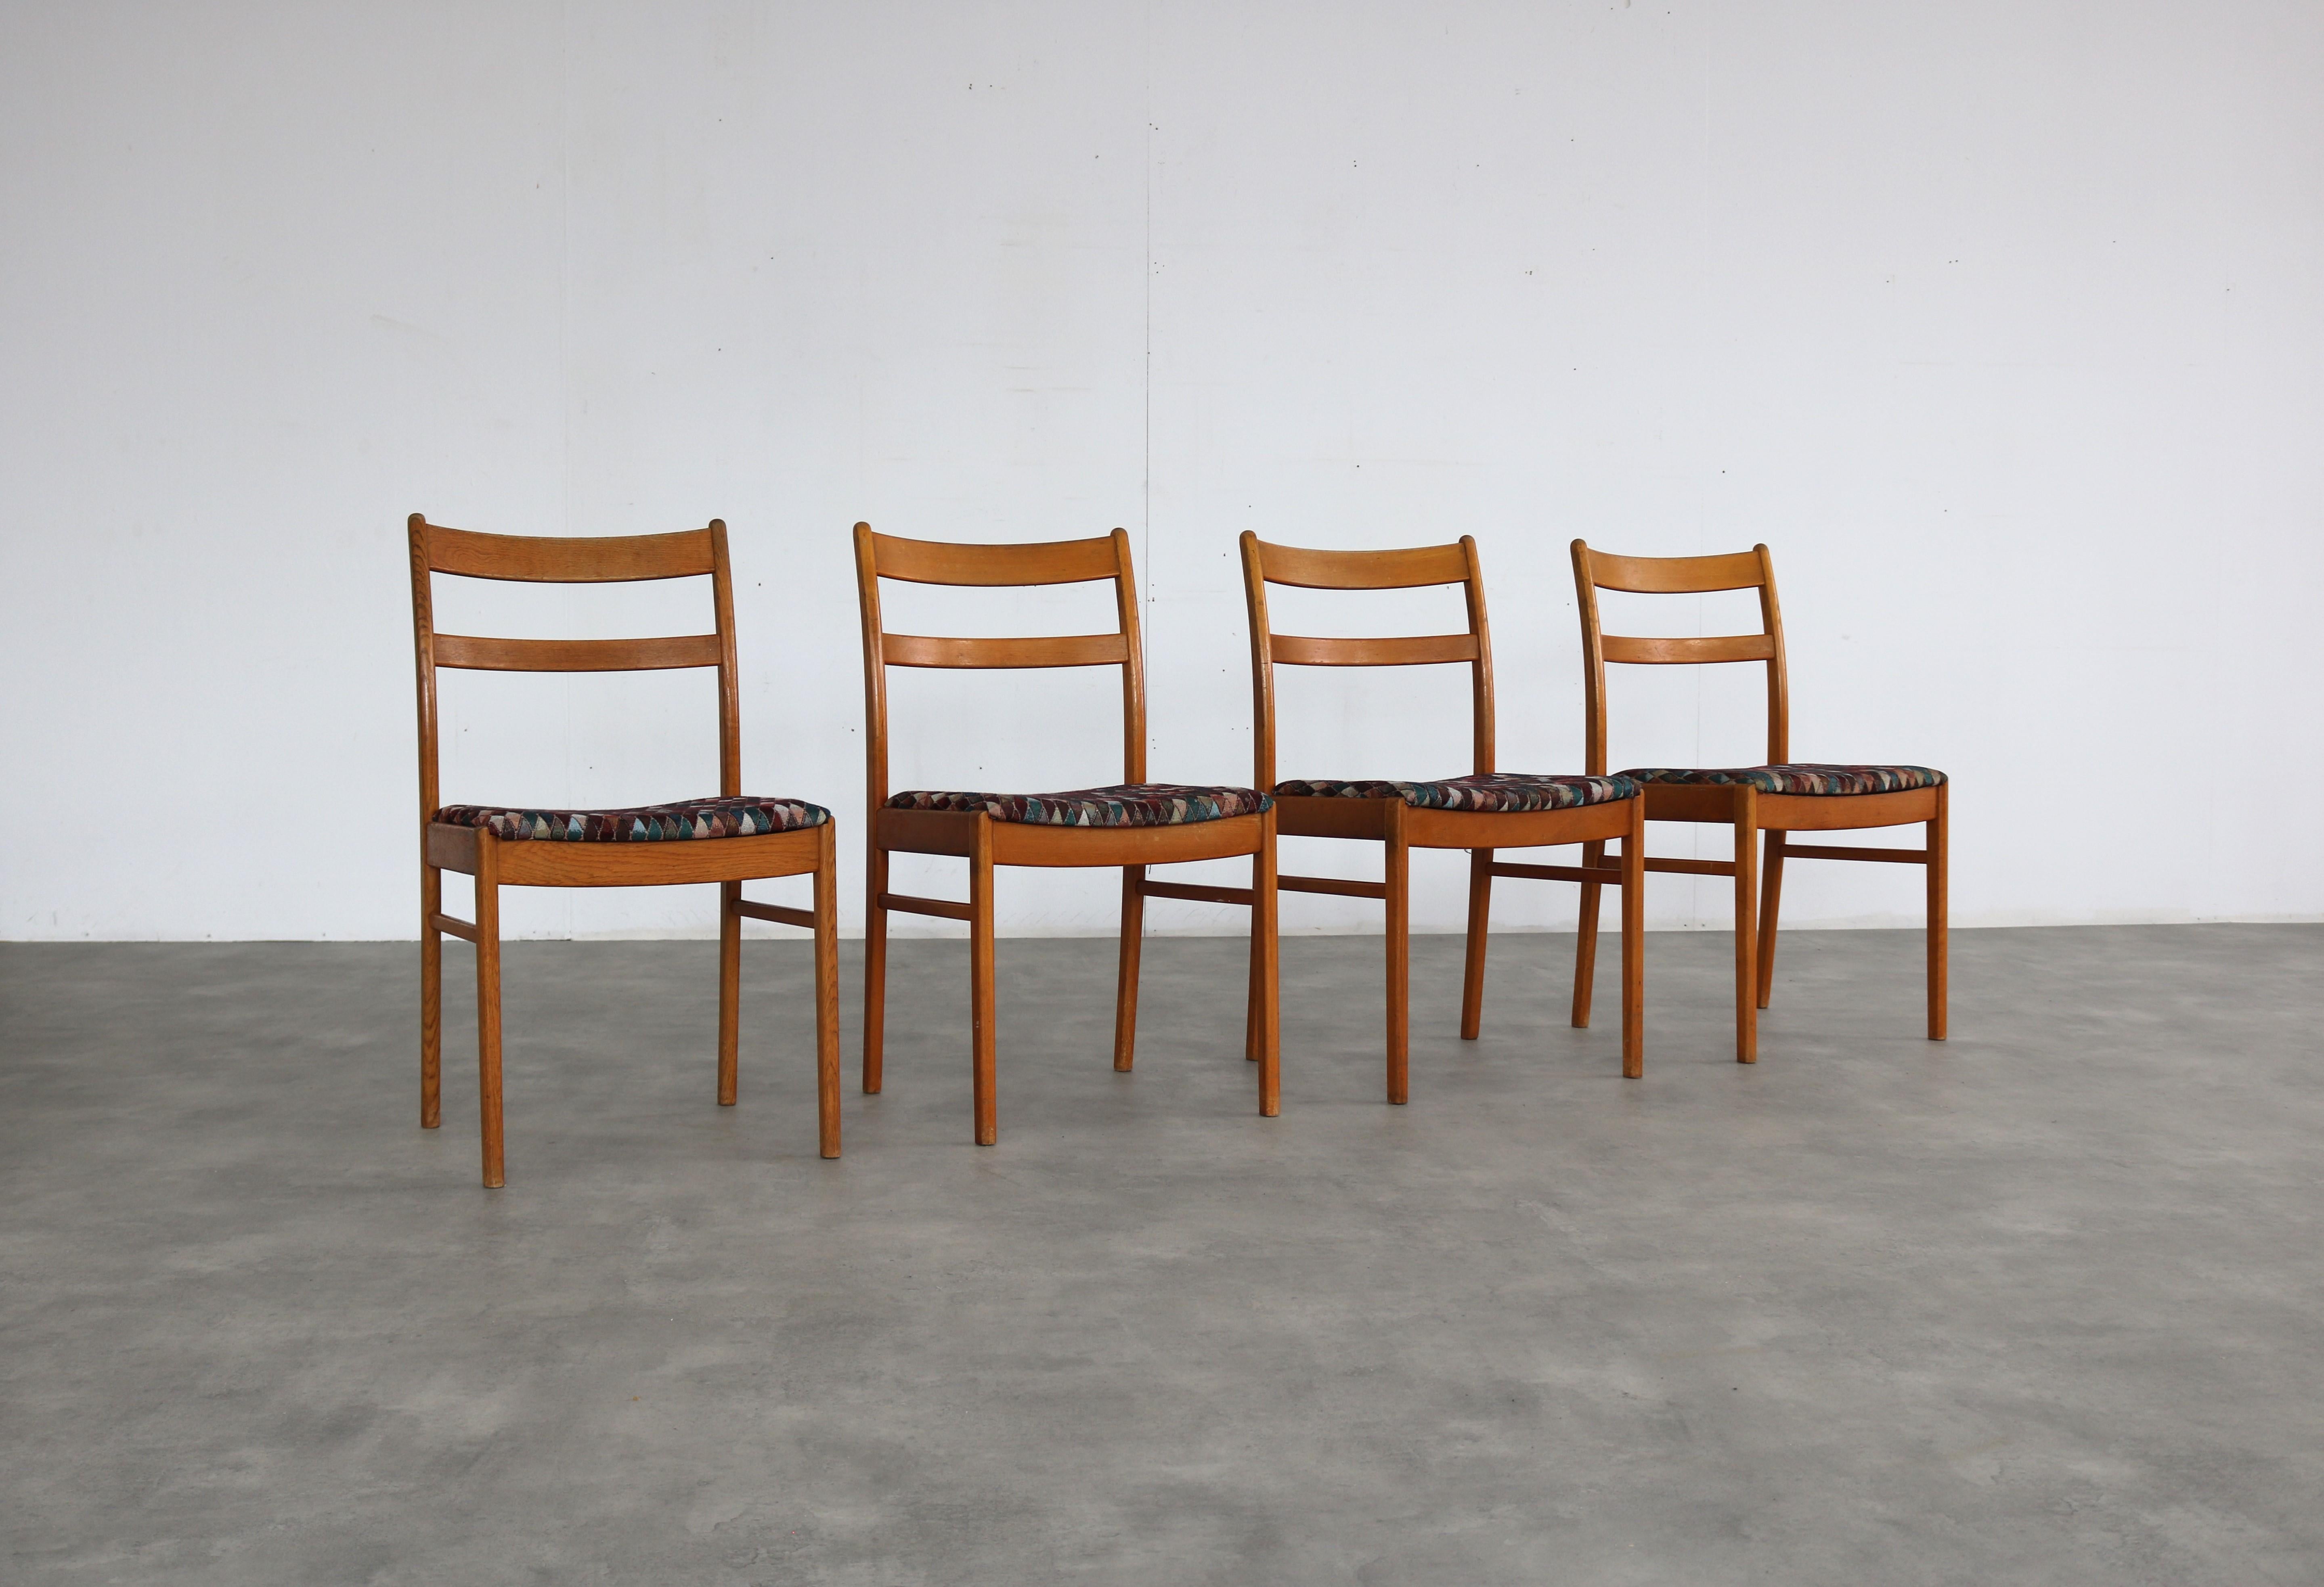 vintage dining room chairs  chairs  60s  Sweden

period  60's
design  unknown  Sweden
condition  good  light signs of use
size  81 x 45 x 50 (hxwxd) seat height 44;

details  oak; upholstery; set of 4;

article number  2305